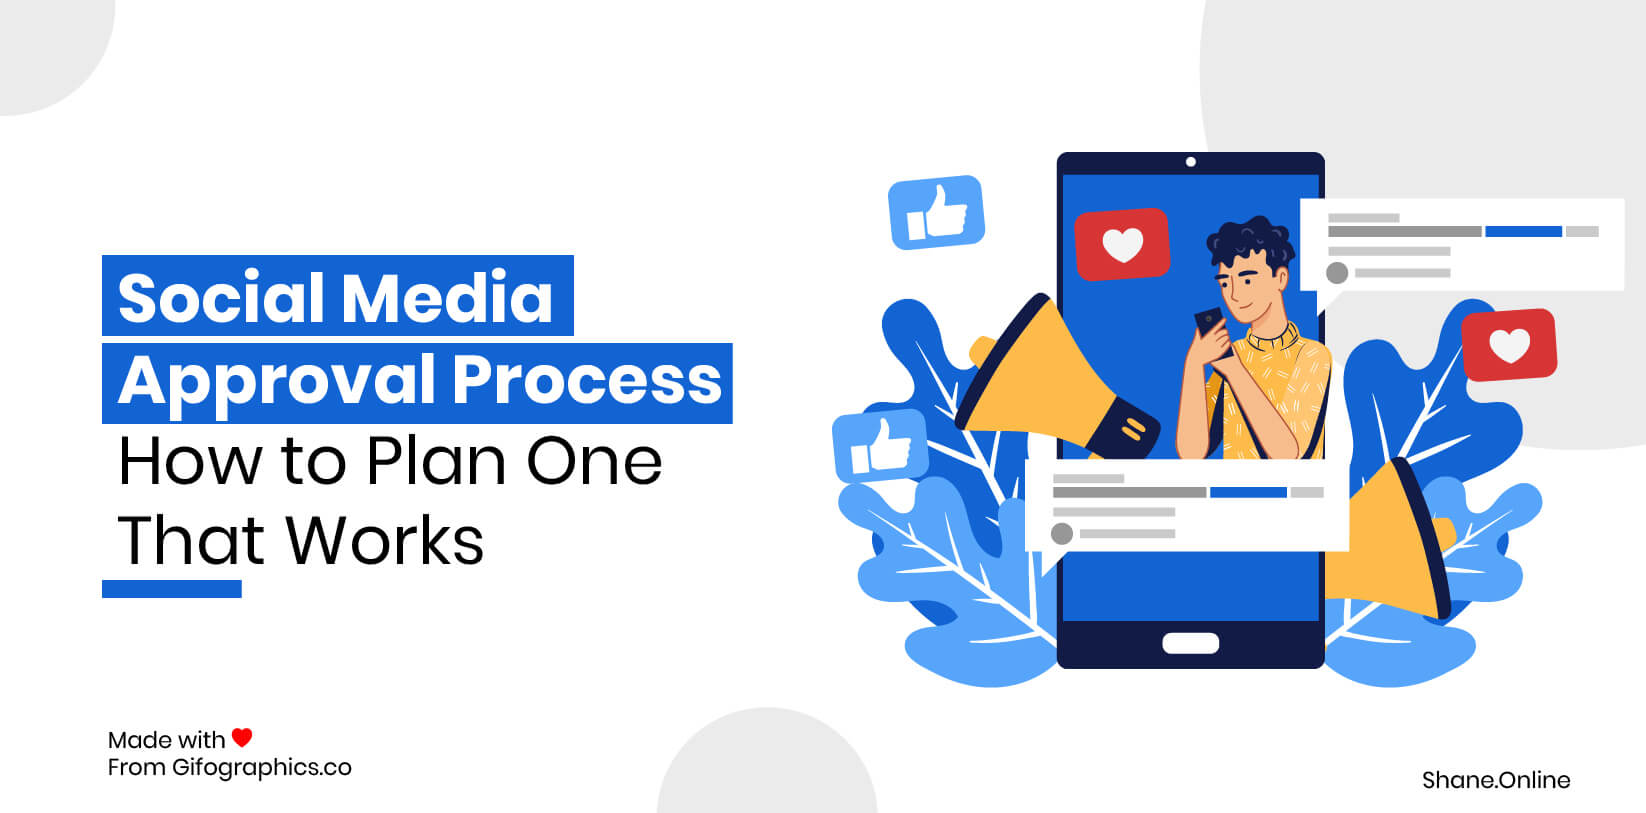 Social Media Approval Process How to Plan One That Works